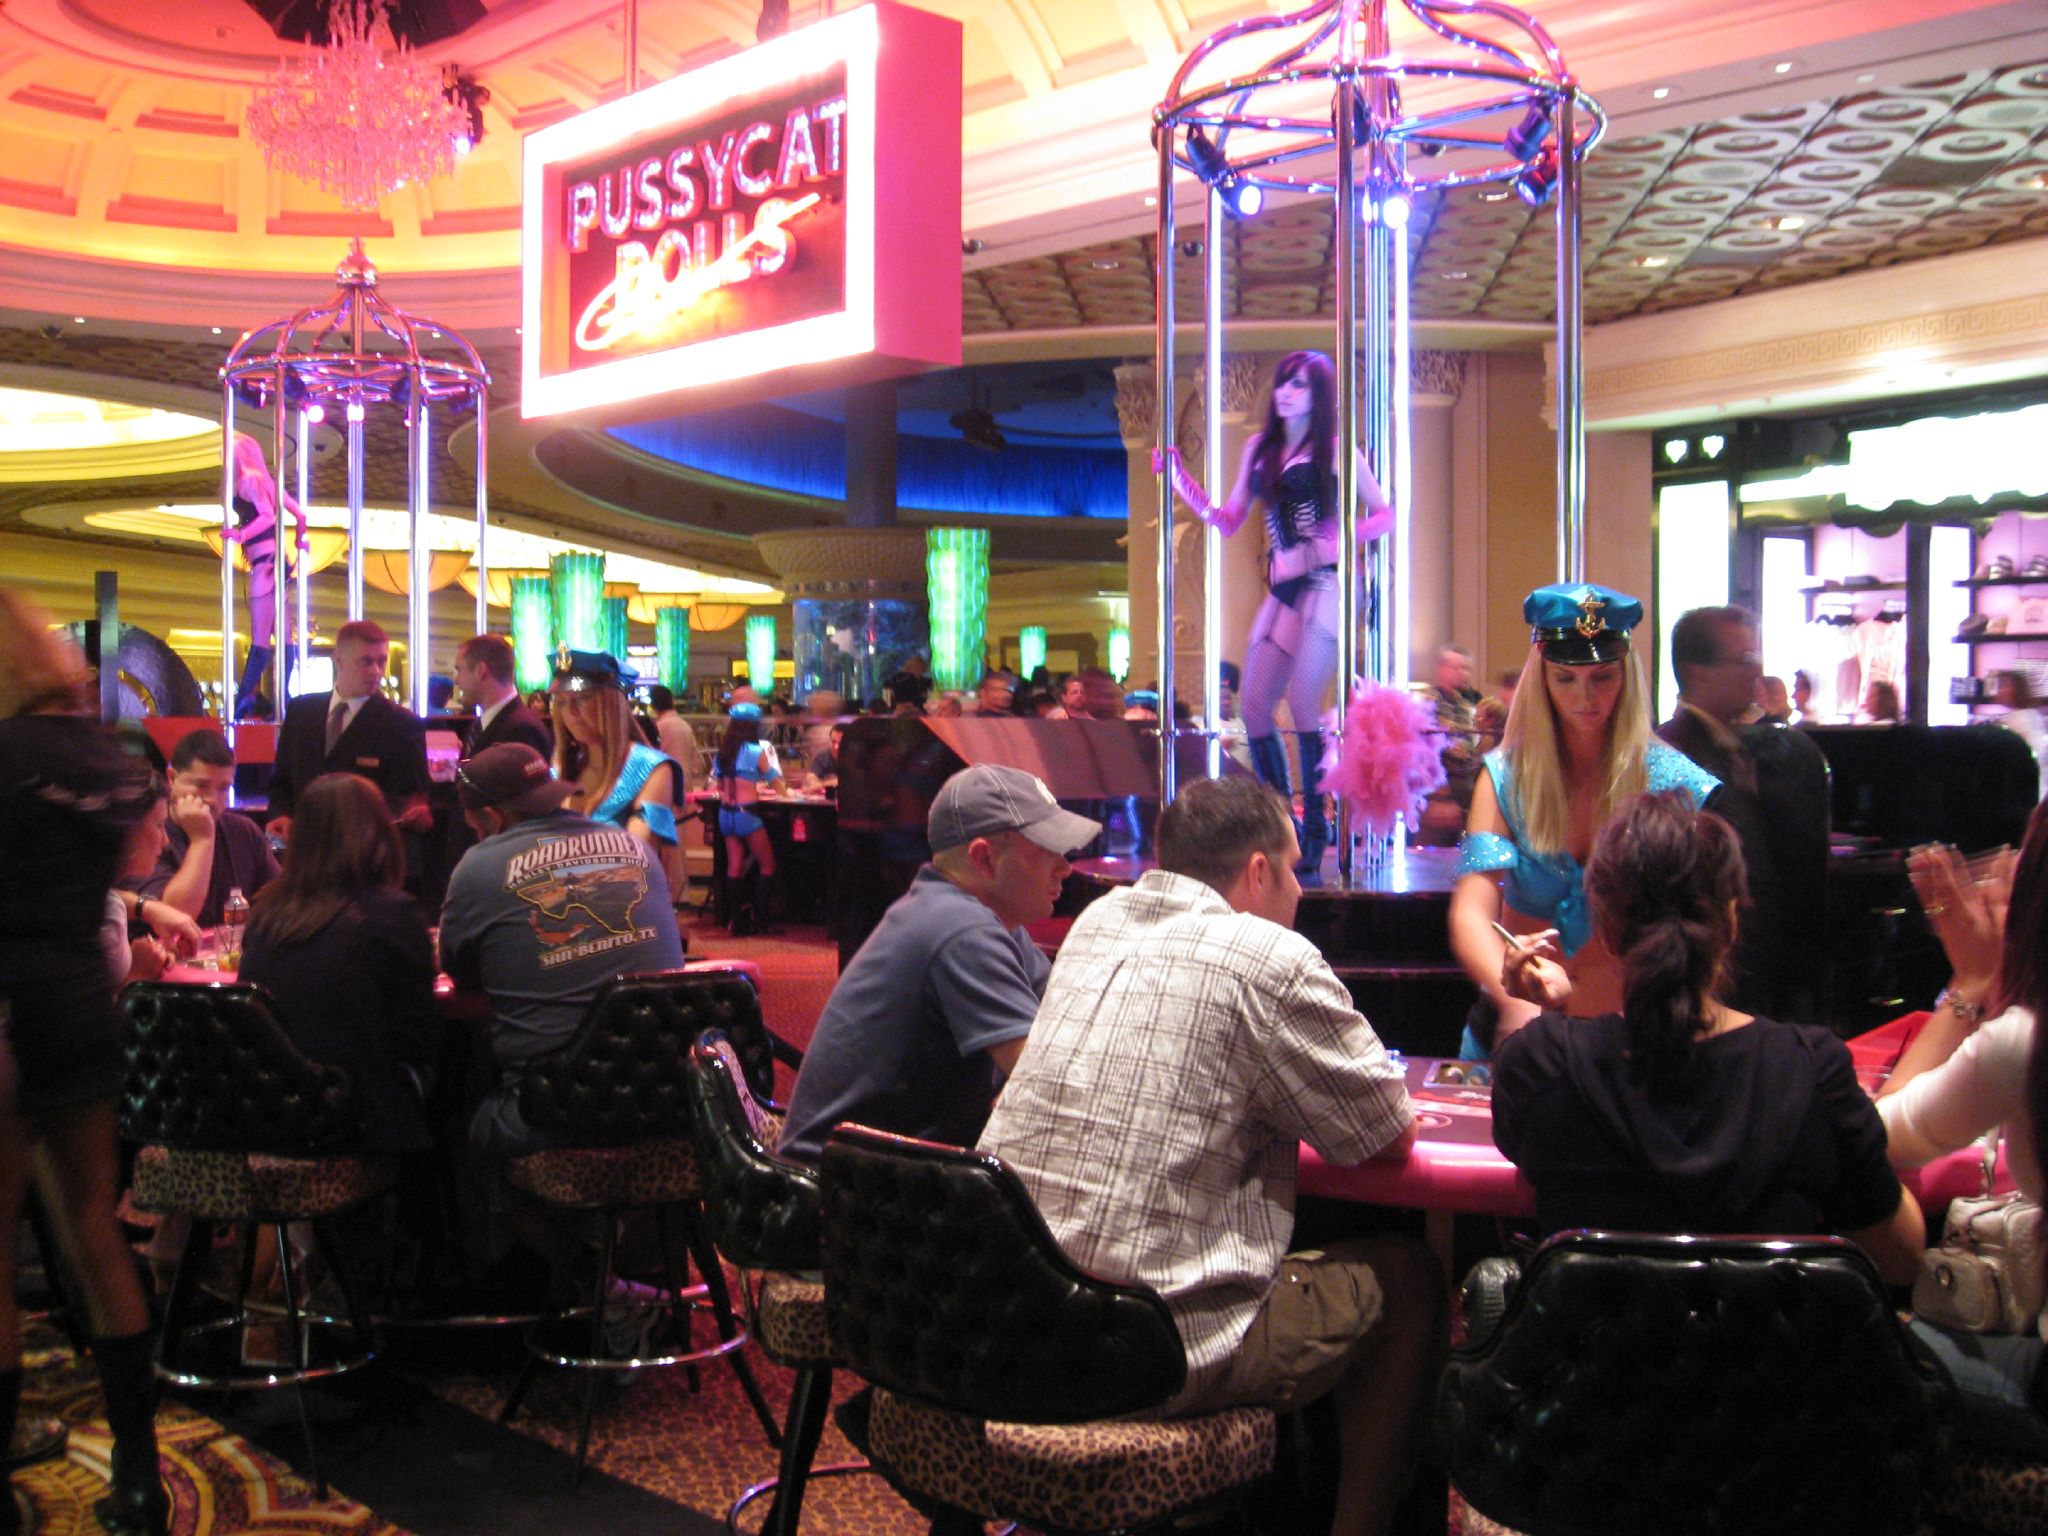 Men and Women Playing Pai Gow Poker at the Pussycat Dolls Casino located at the Caesars Palace in Las Vegas